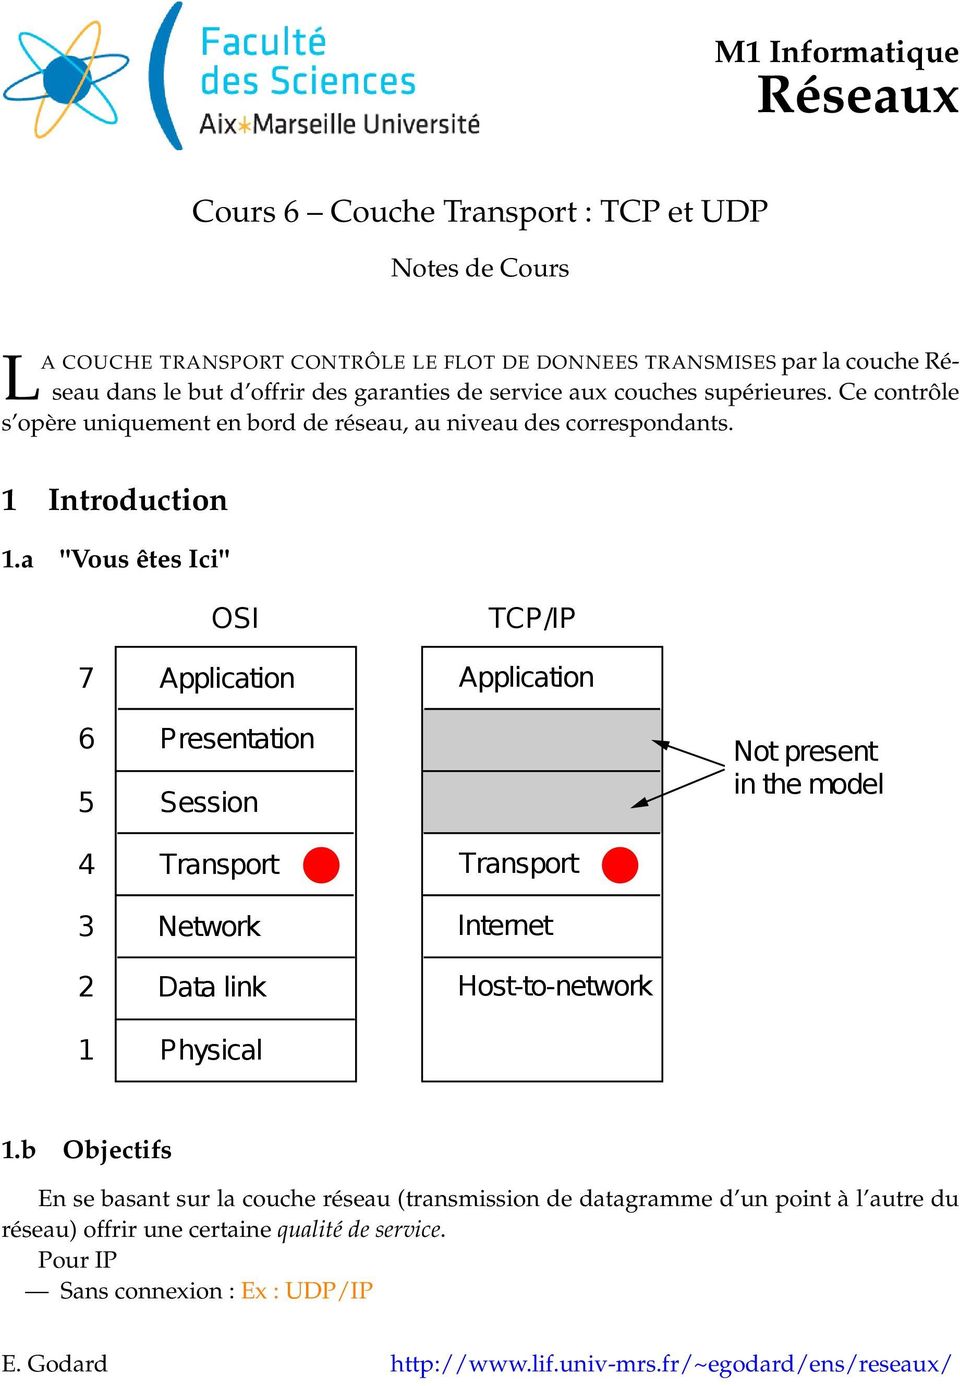 a "Vous êtes Ici" 7 OSI Application TCP/IP Application 6 5 Presentation Session Not present in the model 4 3 2 1 Transport Network Data link Physical Transport Internet Host-to-network 1.